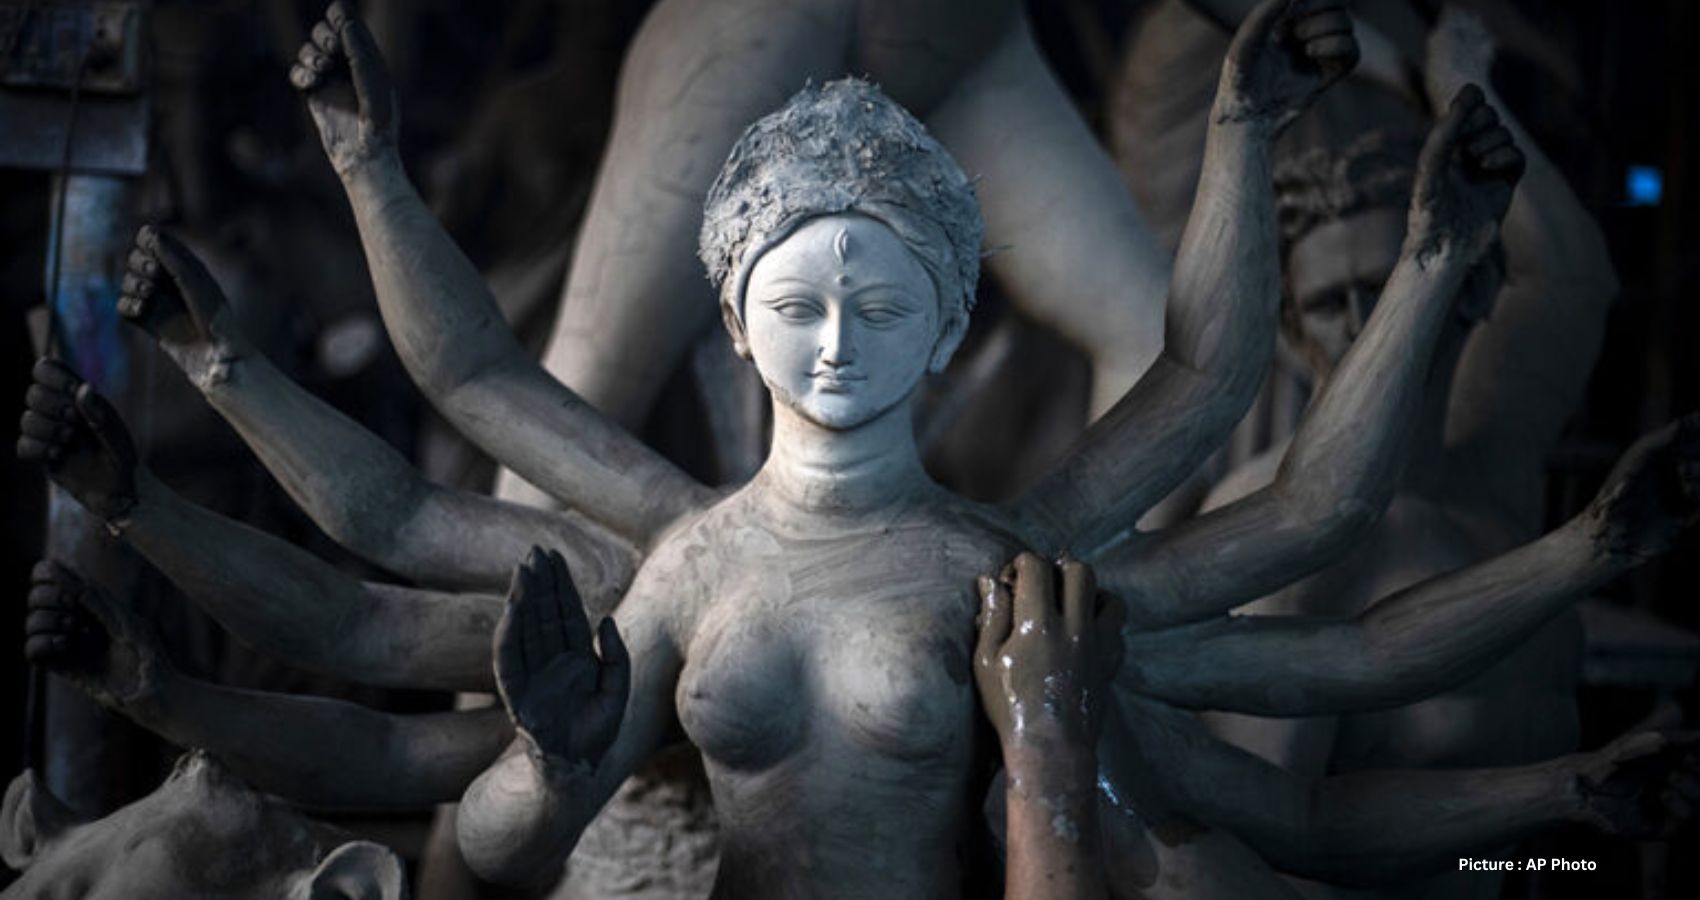 Hindu women look to ancient goddesses for guidance on modern feminism